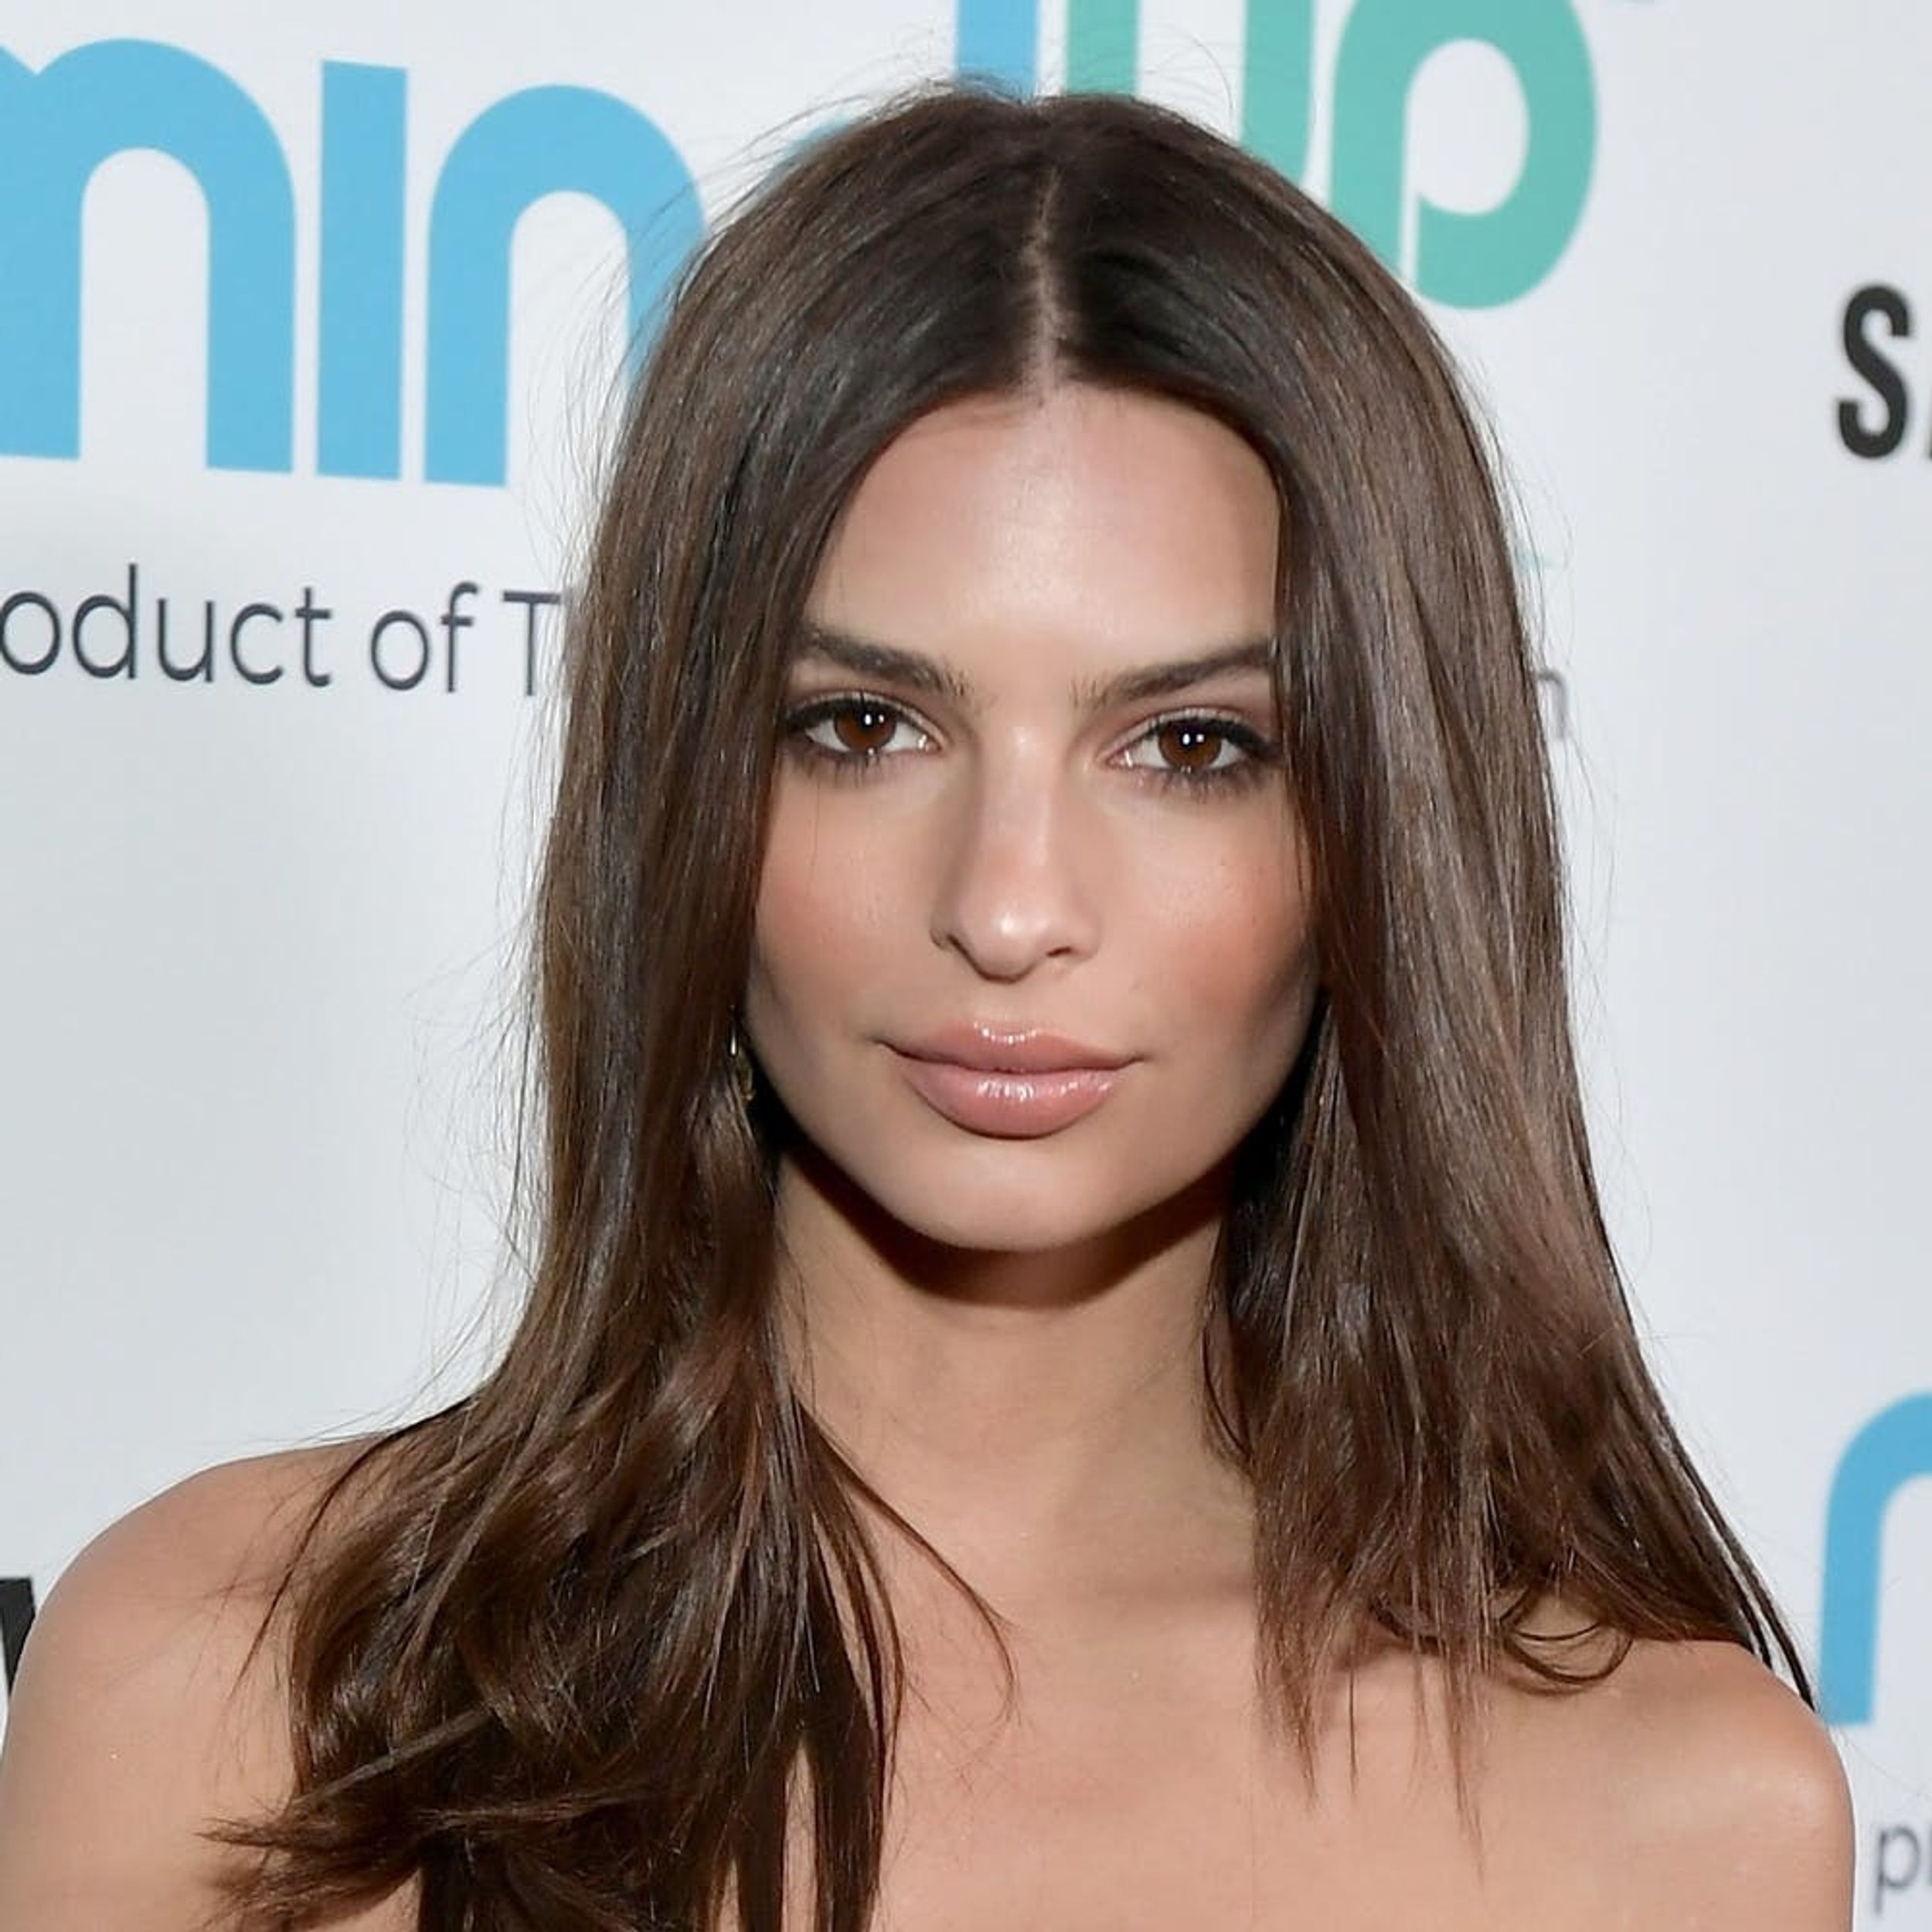 Uh-Oh: Emily Ratajkowski Is in Trouble for Allegedly Copying Swimsuit ...